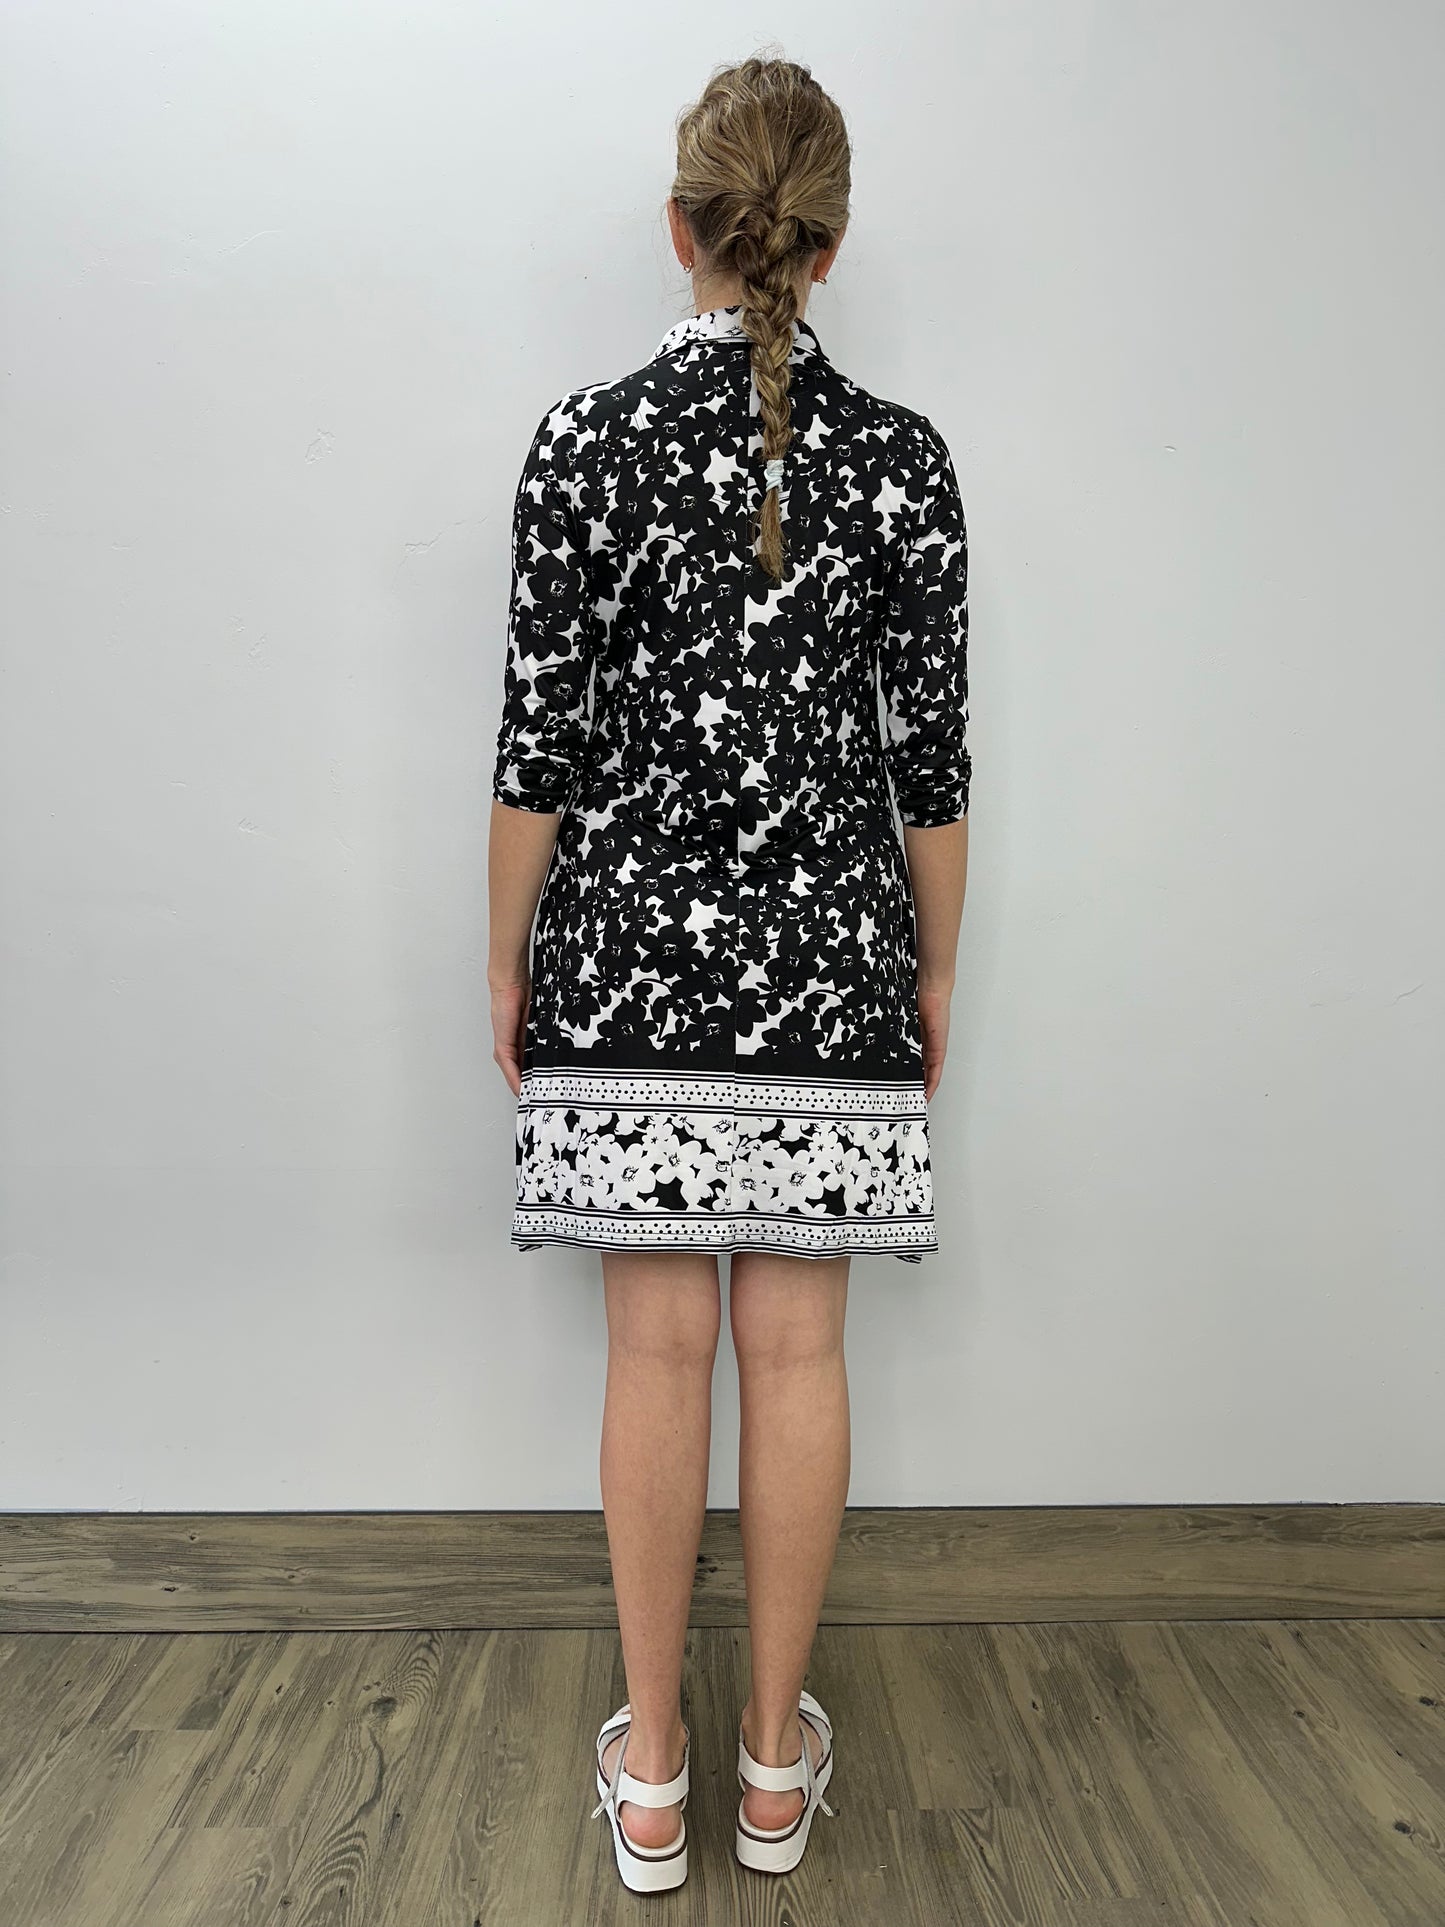 Black and White Floral 3/4 Sleeve Zip Up Dress